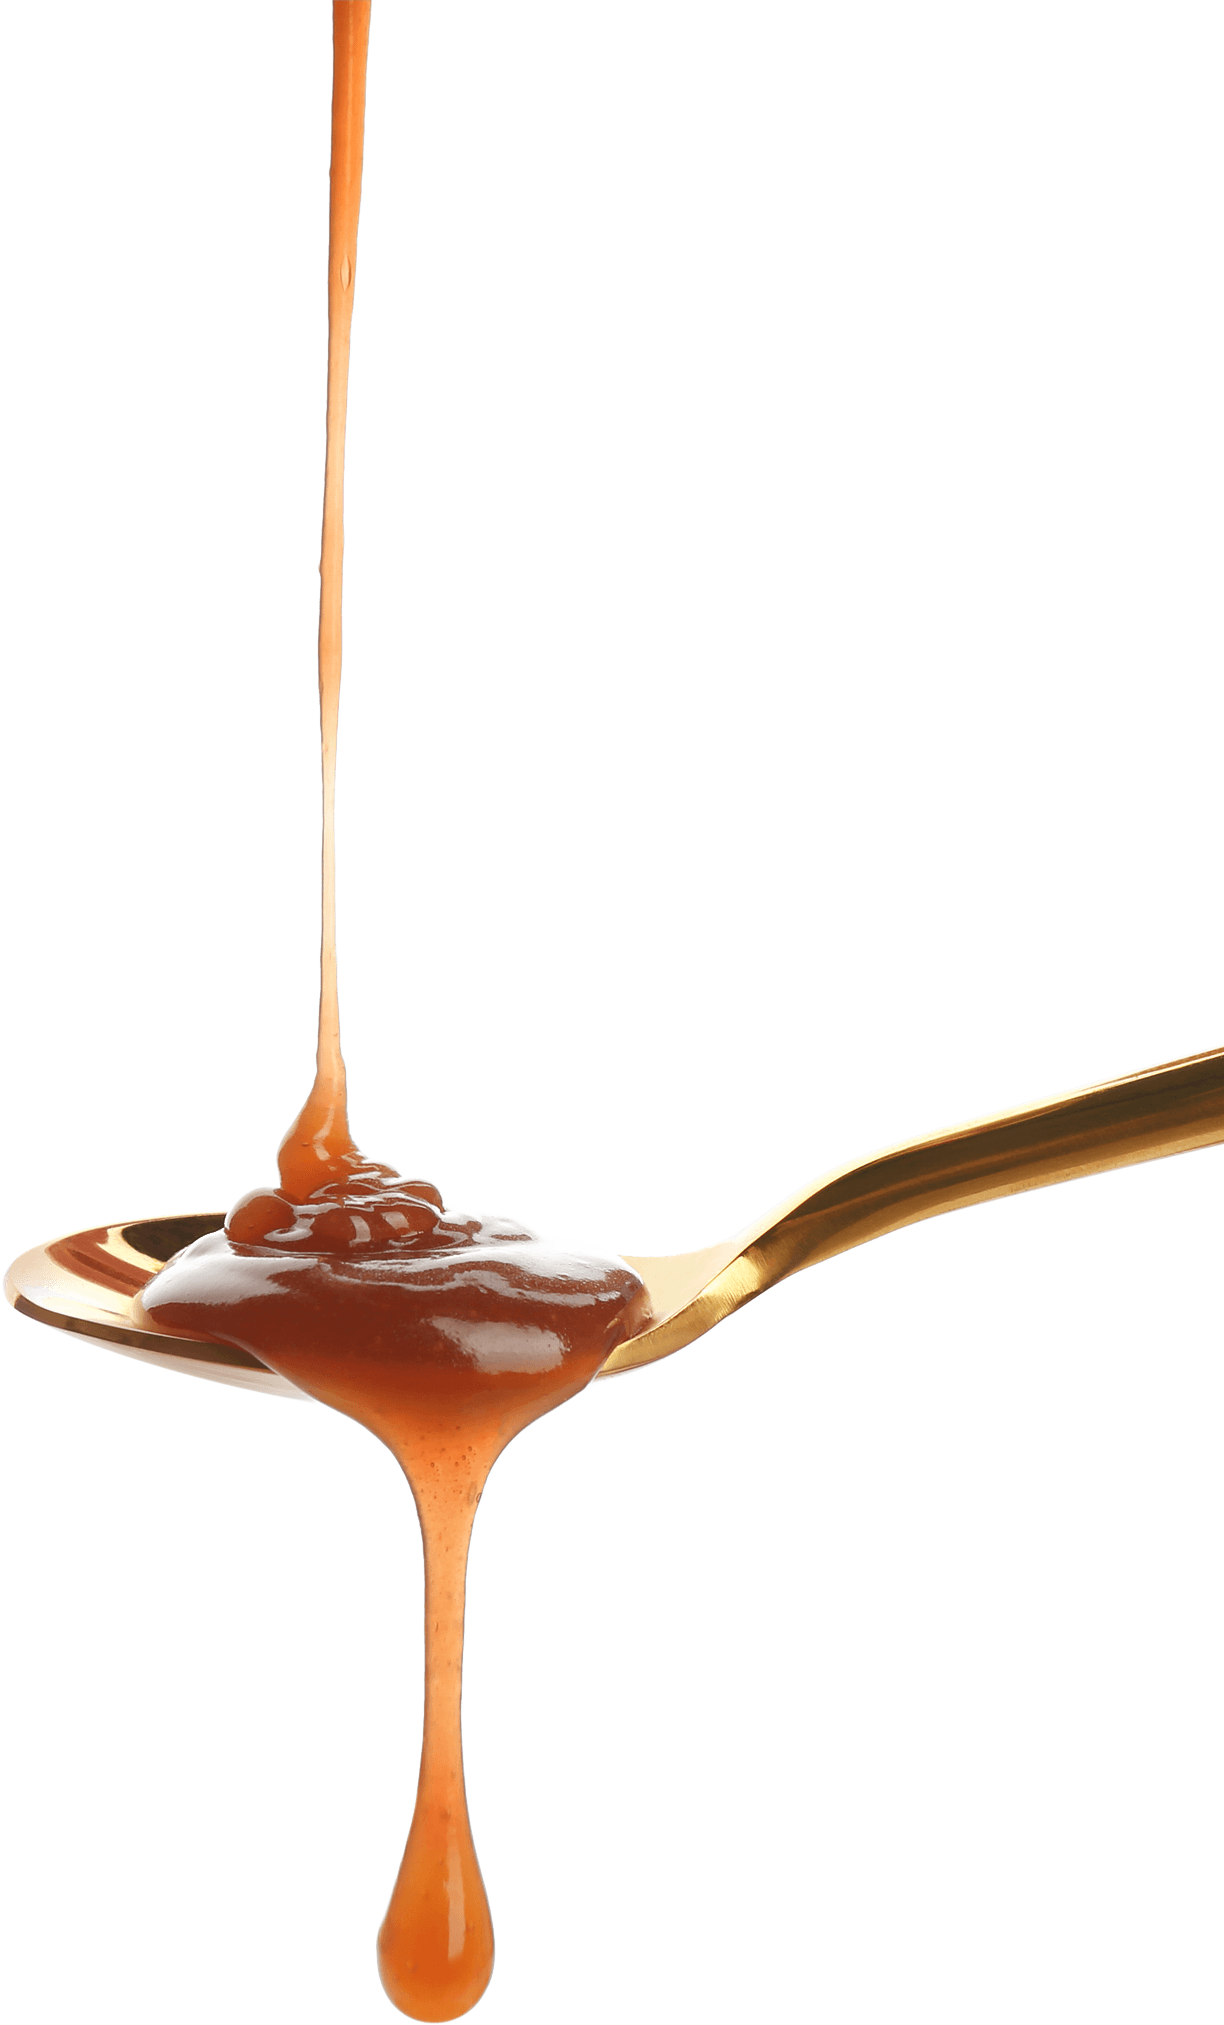 syrup image